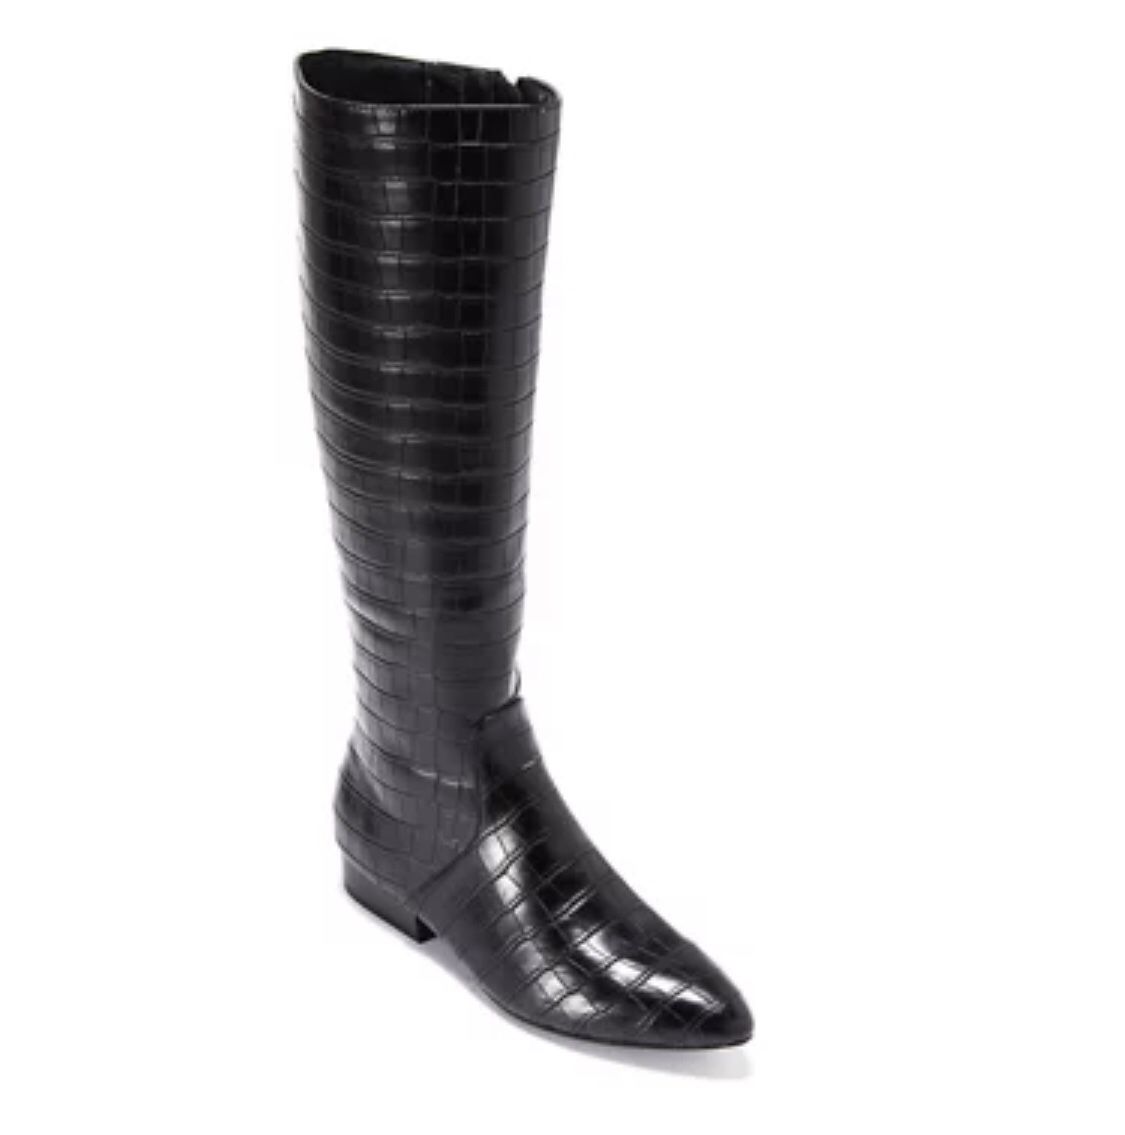 Black Boot New With Tags 7.5 M Size